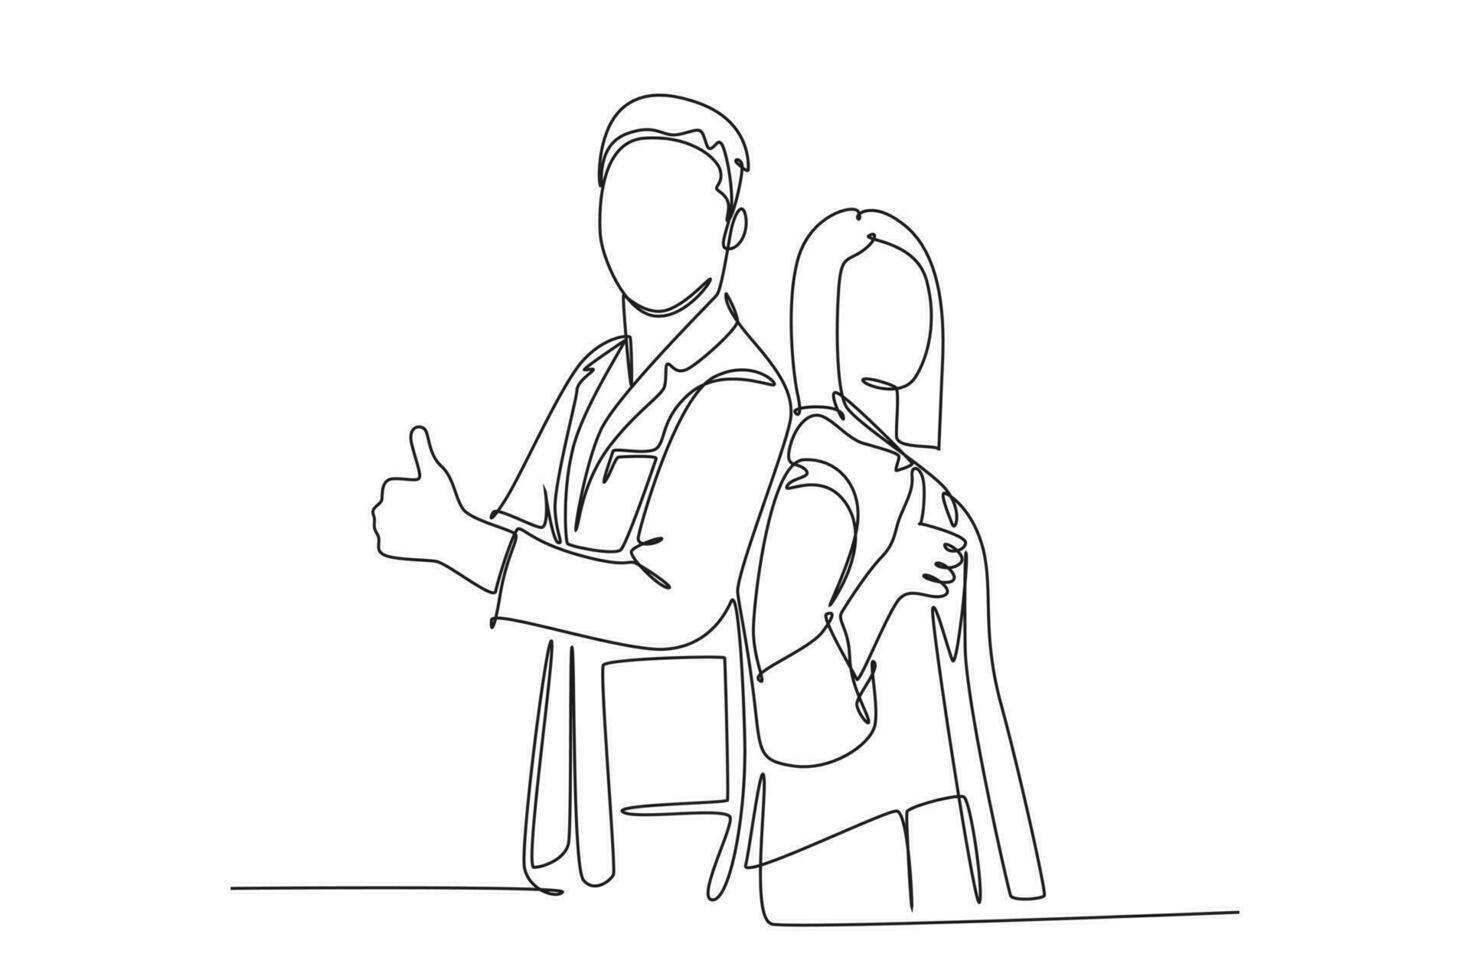 Single continuous line drawing young happy couple male and female doctor standing together and giving thumbs up gesture. Medical healthcare teamwork. One line draw graphic design vector illustration